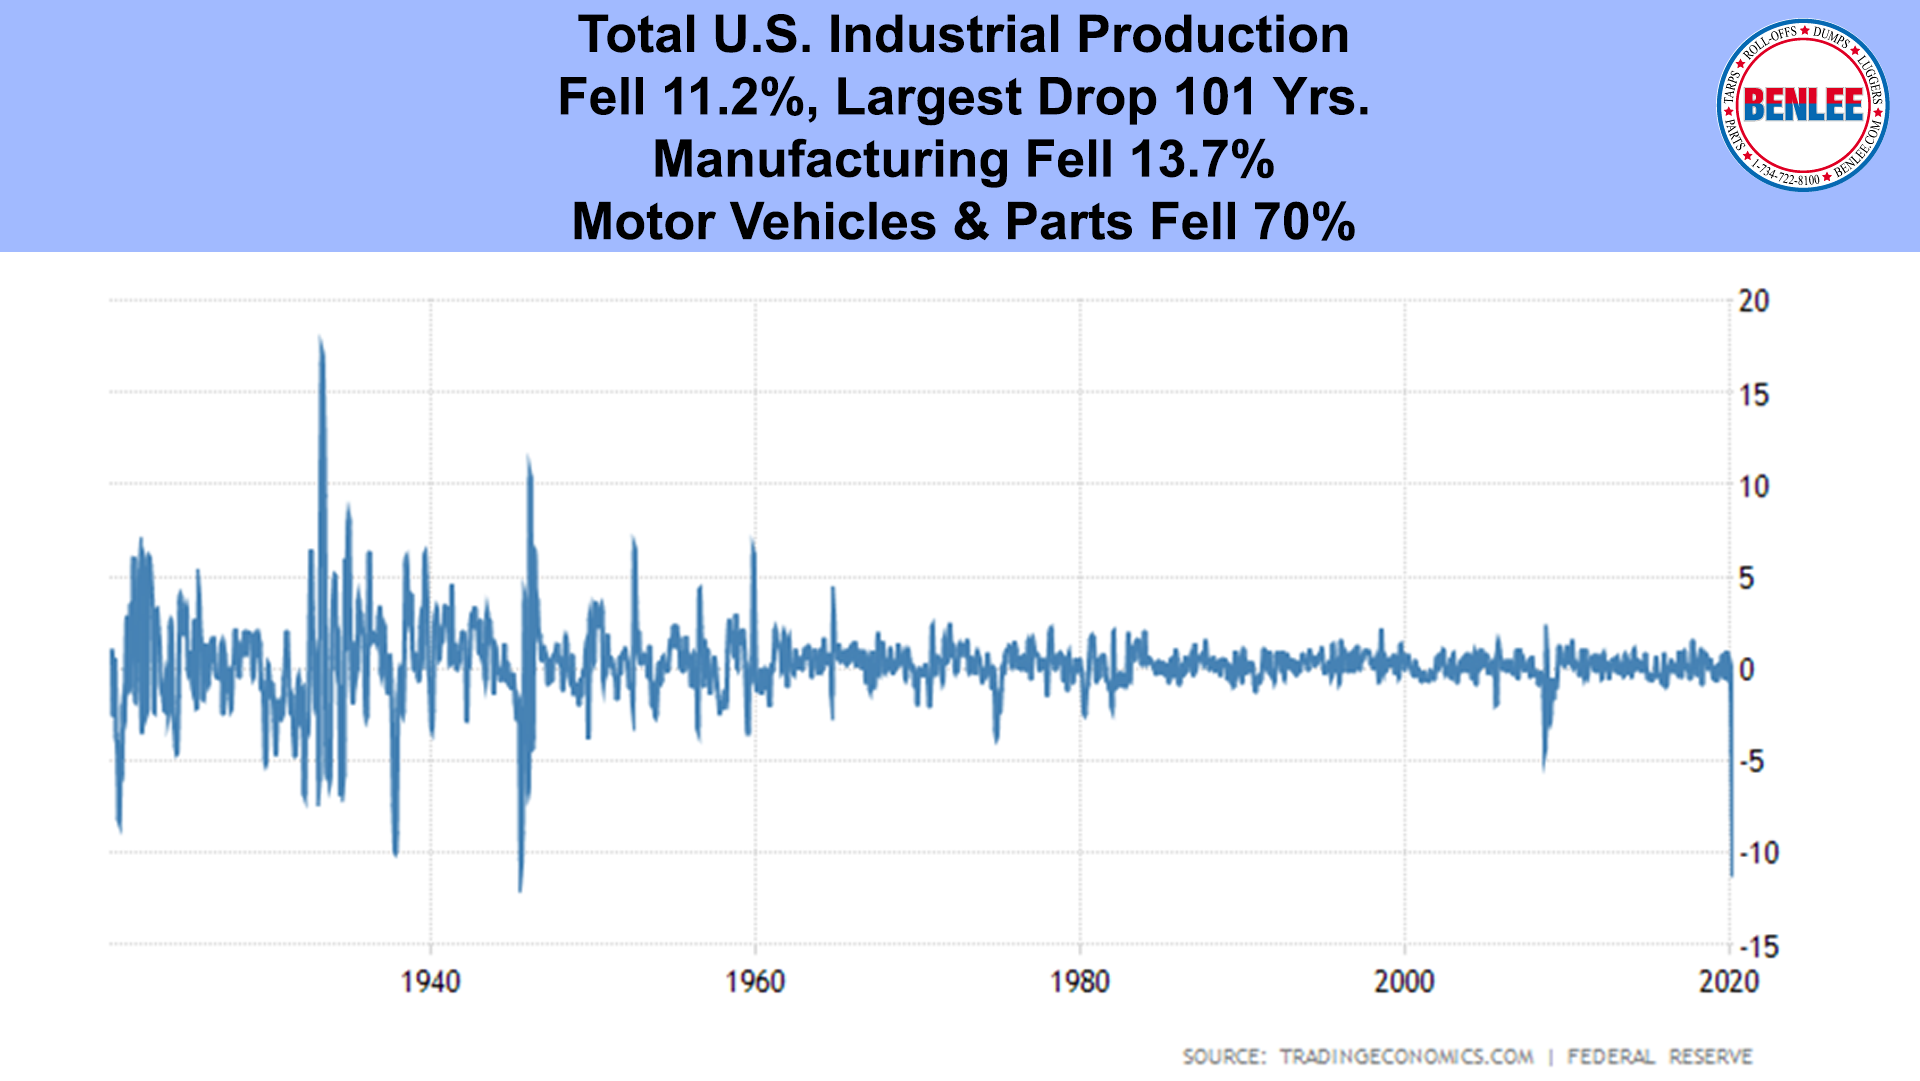 Total U.S. Industrial Production